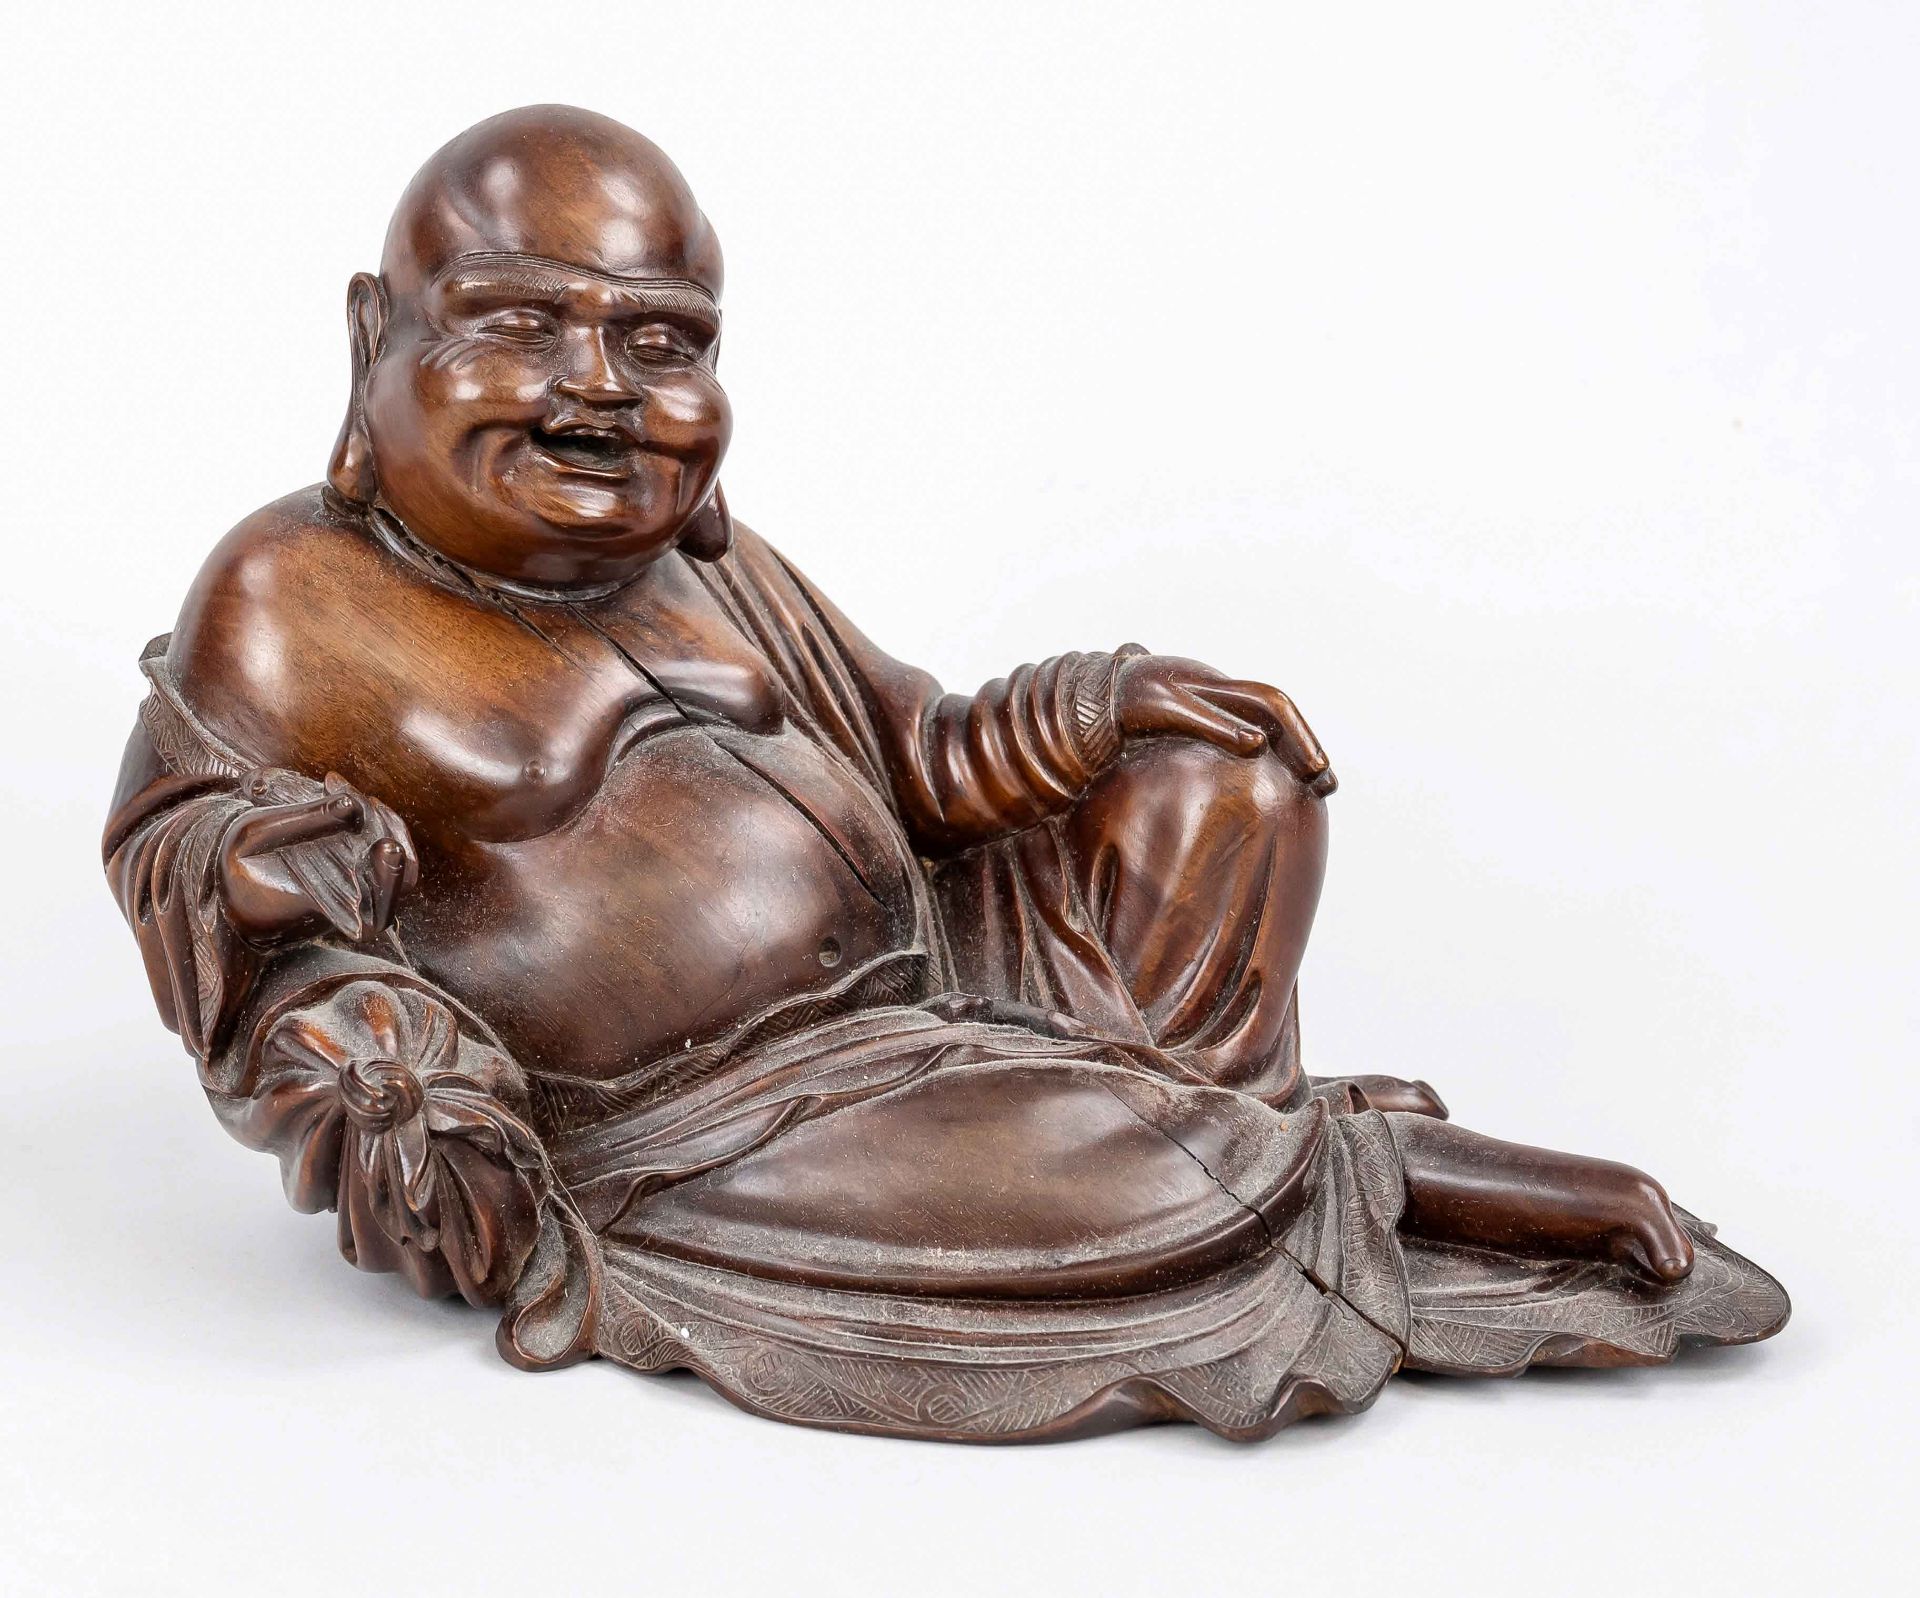 Warehousing budai, China, 20th c., carved rosewood in the shape of the so-called potbellied budai